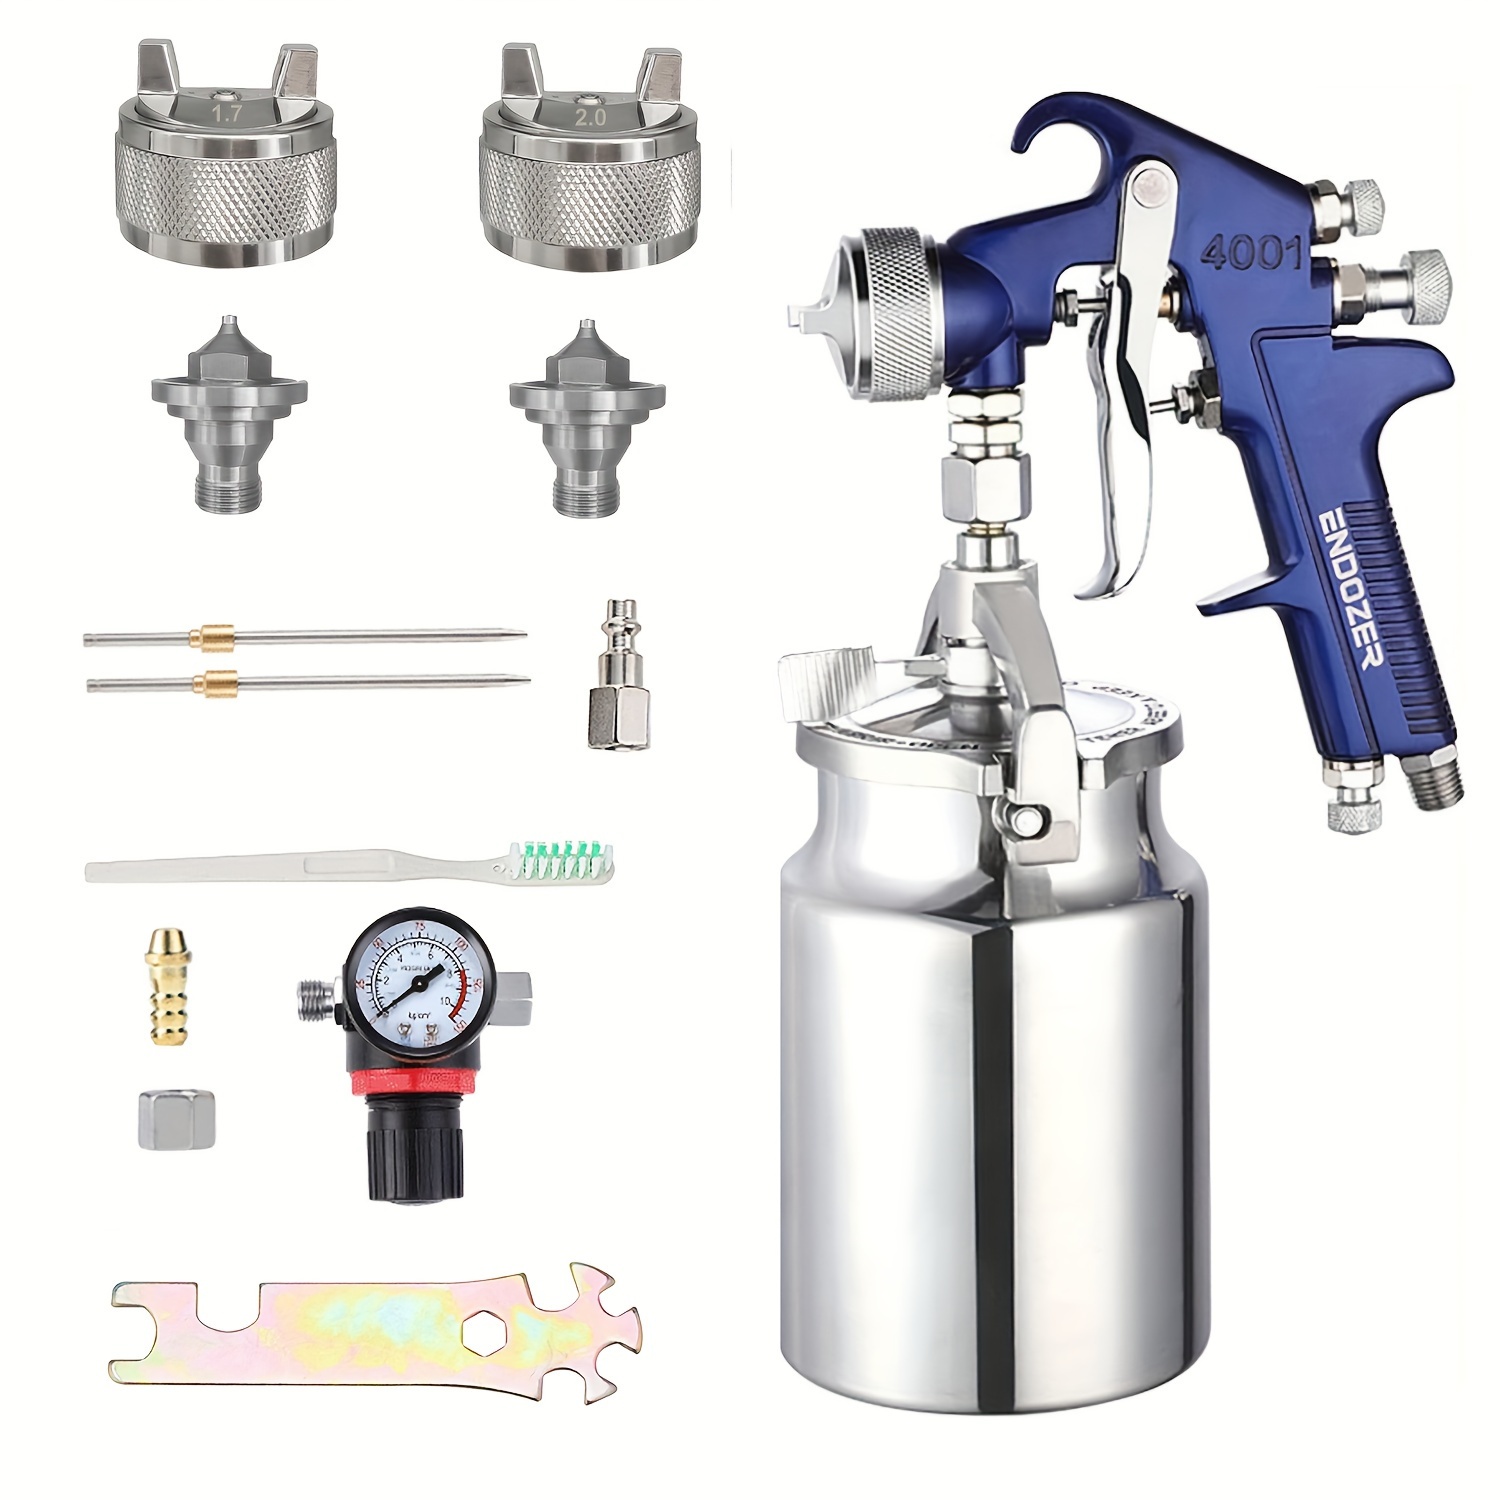 Air Spray Gun, Gravity Feed Paint Sprayers with 1000cc Aluminum Cup, 2mm  Nozzle 360 Atomization Handheld Sprayer Adjustable, Airbrush Painting Tool